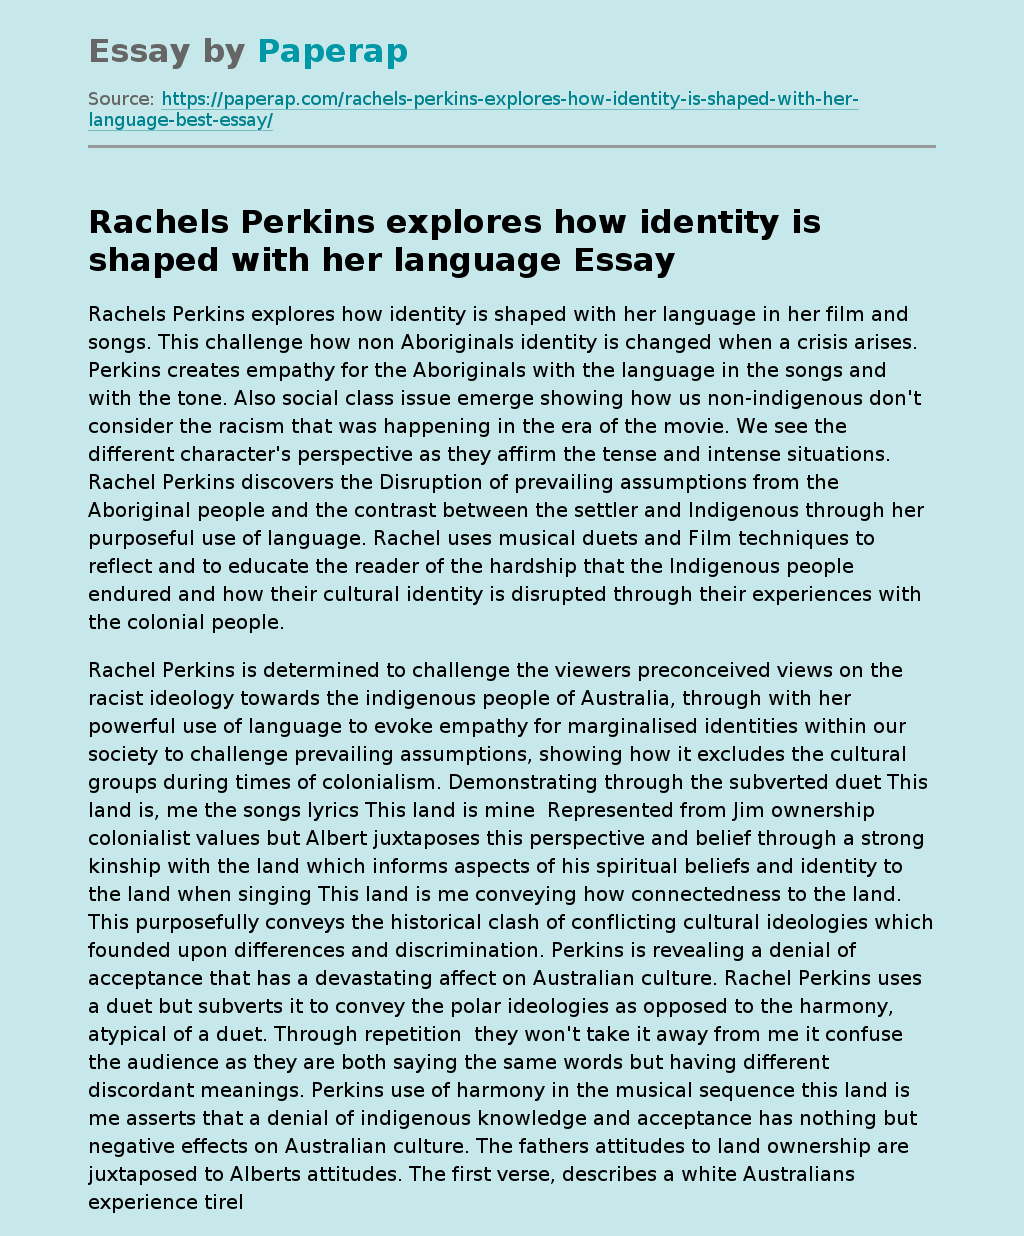 Rachels Perkins explores how identity is shaped with her language